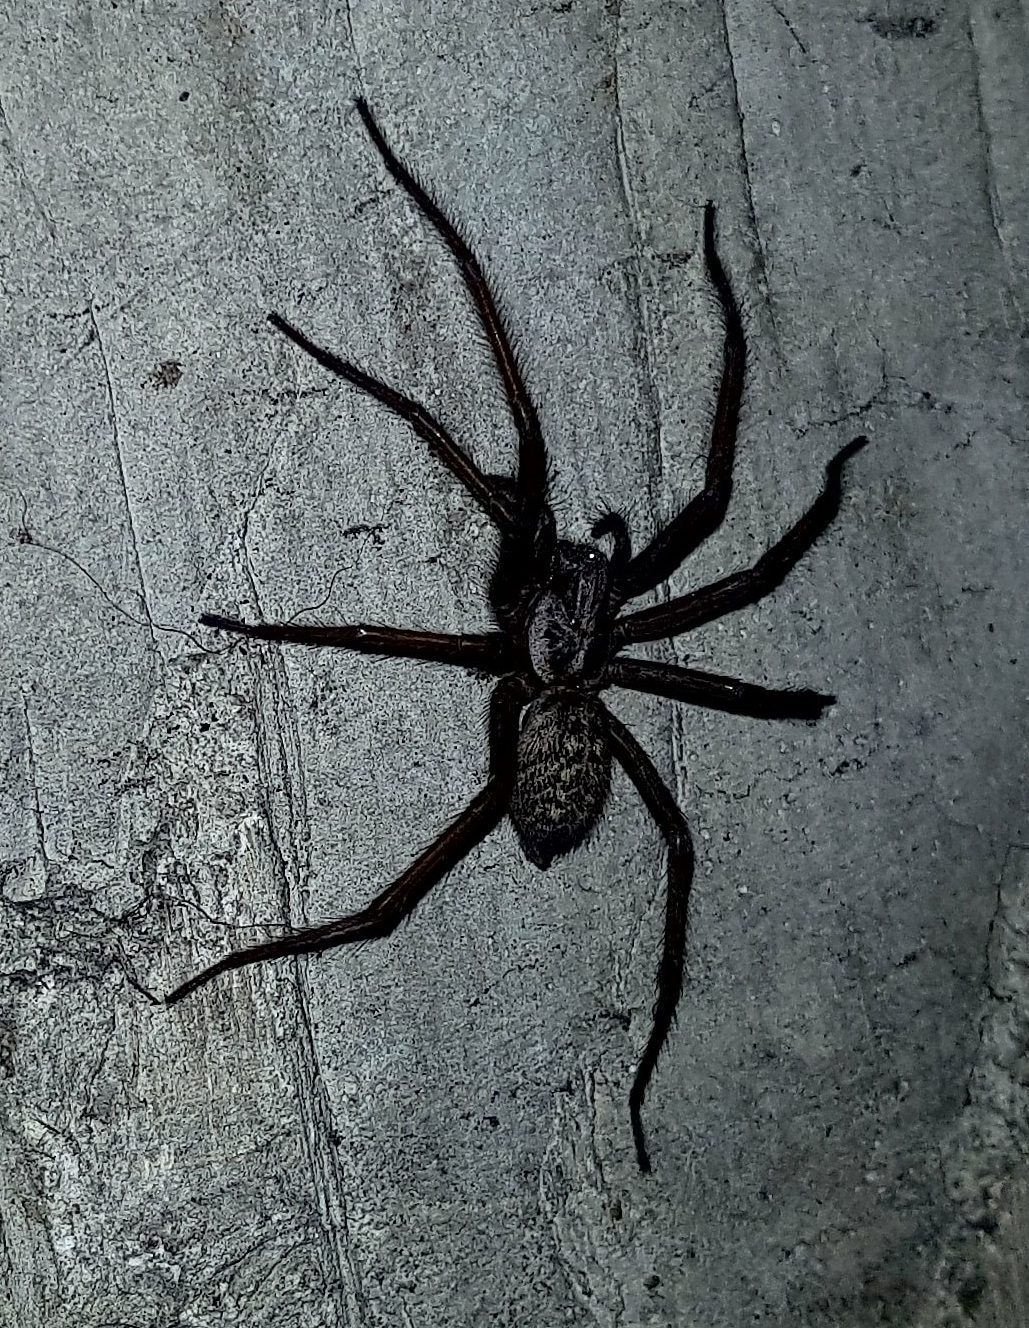 Picture of Eratigena atrica (Giant House Spider) - Lateral